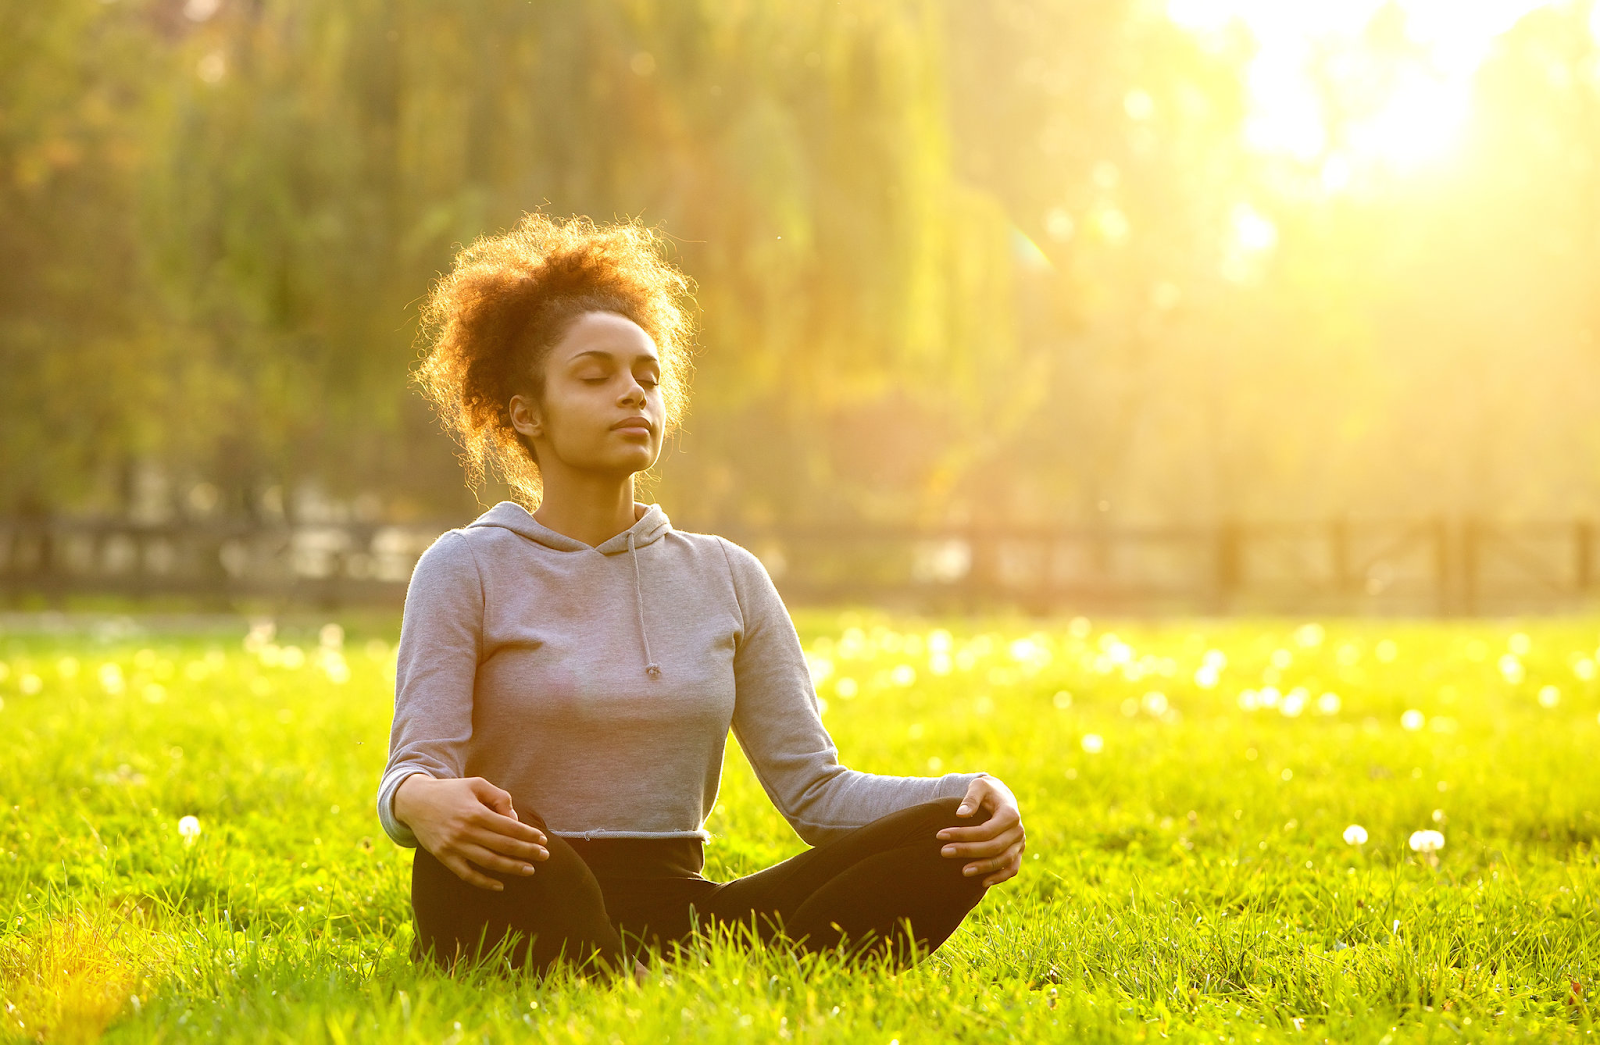 Breathing Exercises to Do Before Any Physical Activity - Understand the Benefits